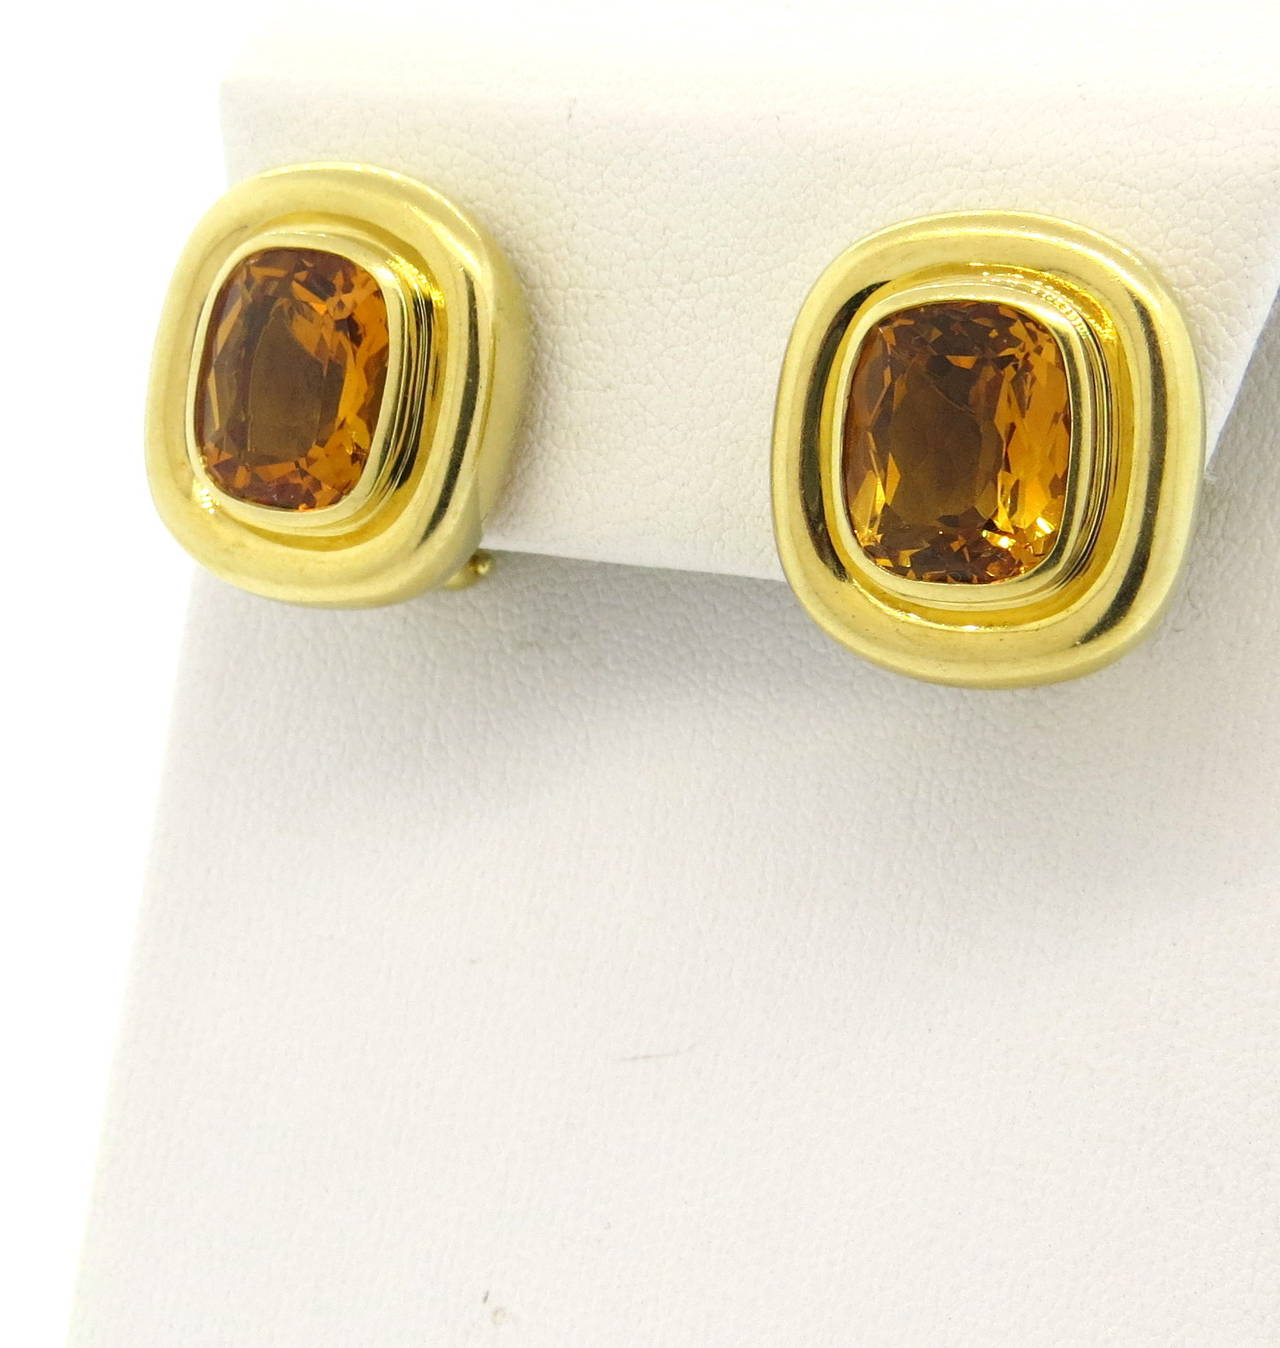 18k yellow gold earrings, crafted by Paloma Picasso for Tiffany & Co, featuring 11.5mm x 9.5mm citrines, approximately 4ct each. Earrings measure 20mm x 18mm. Marked Paloma Picasso,750, Tiffany & Co. Weight - 20.8 grams